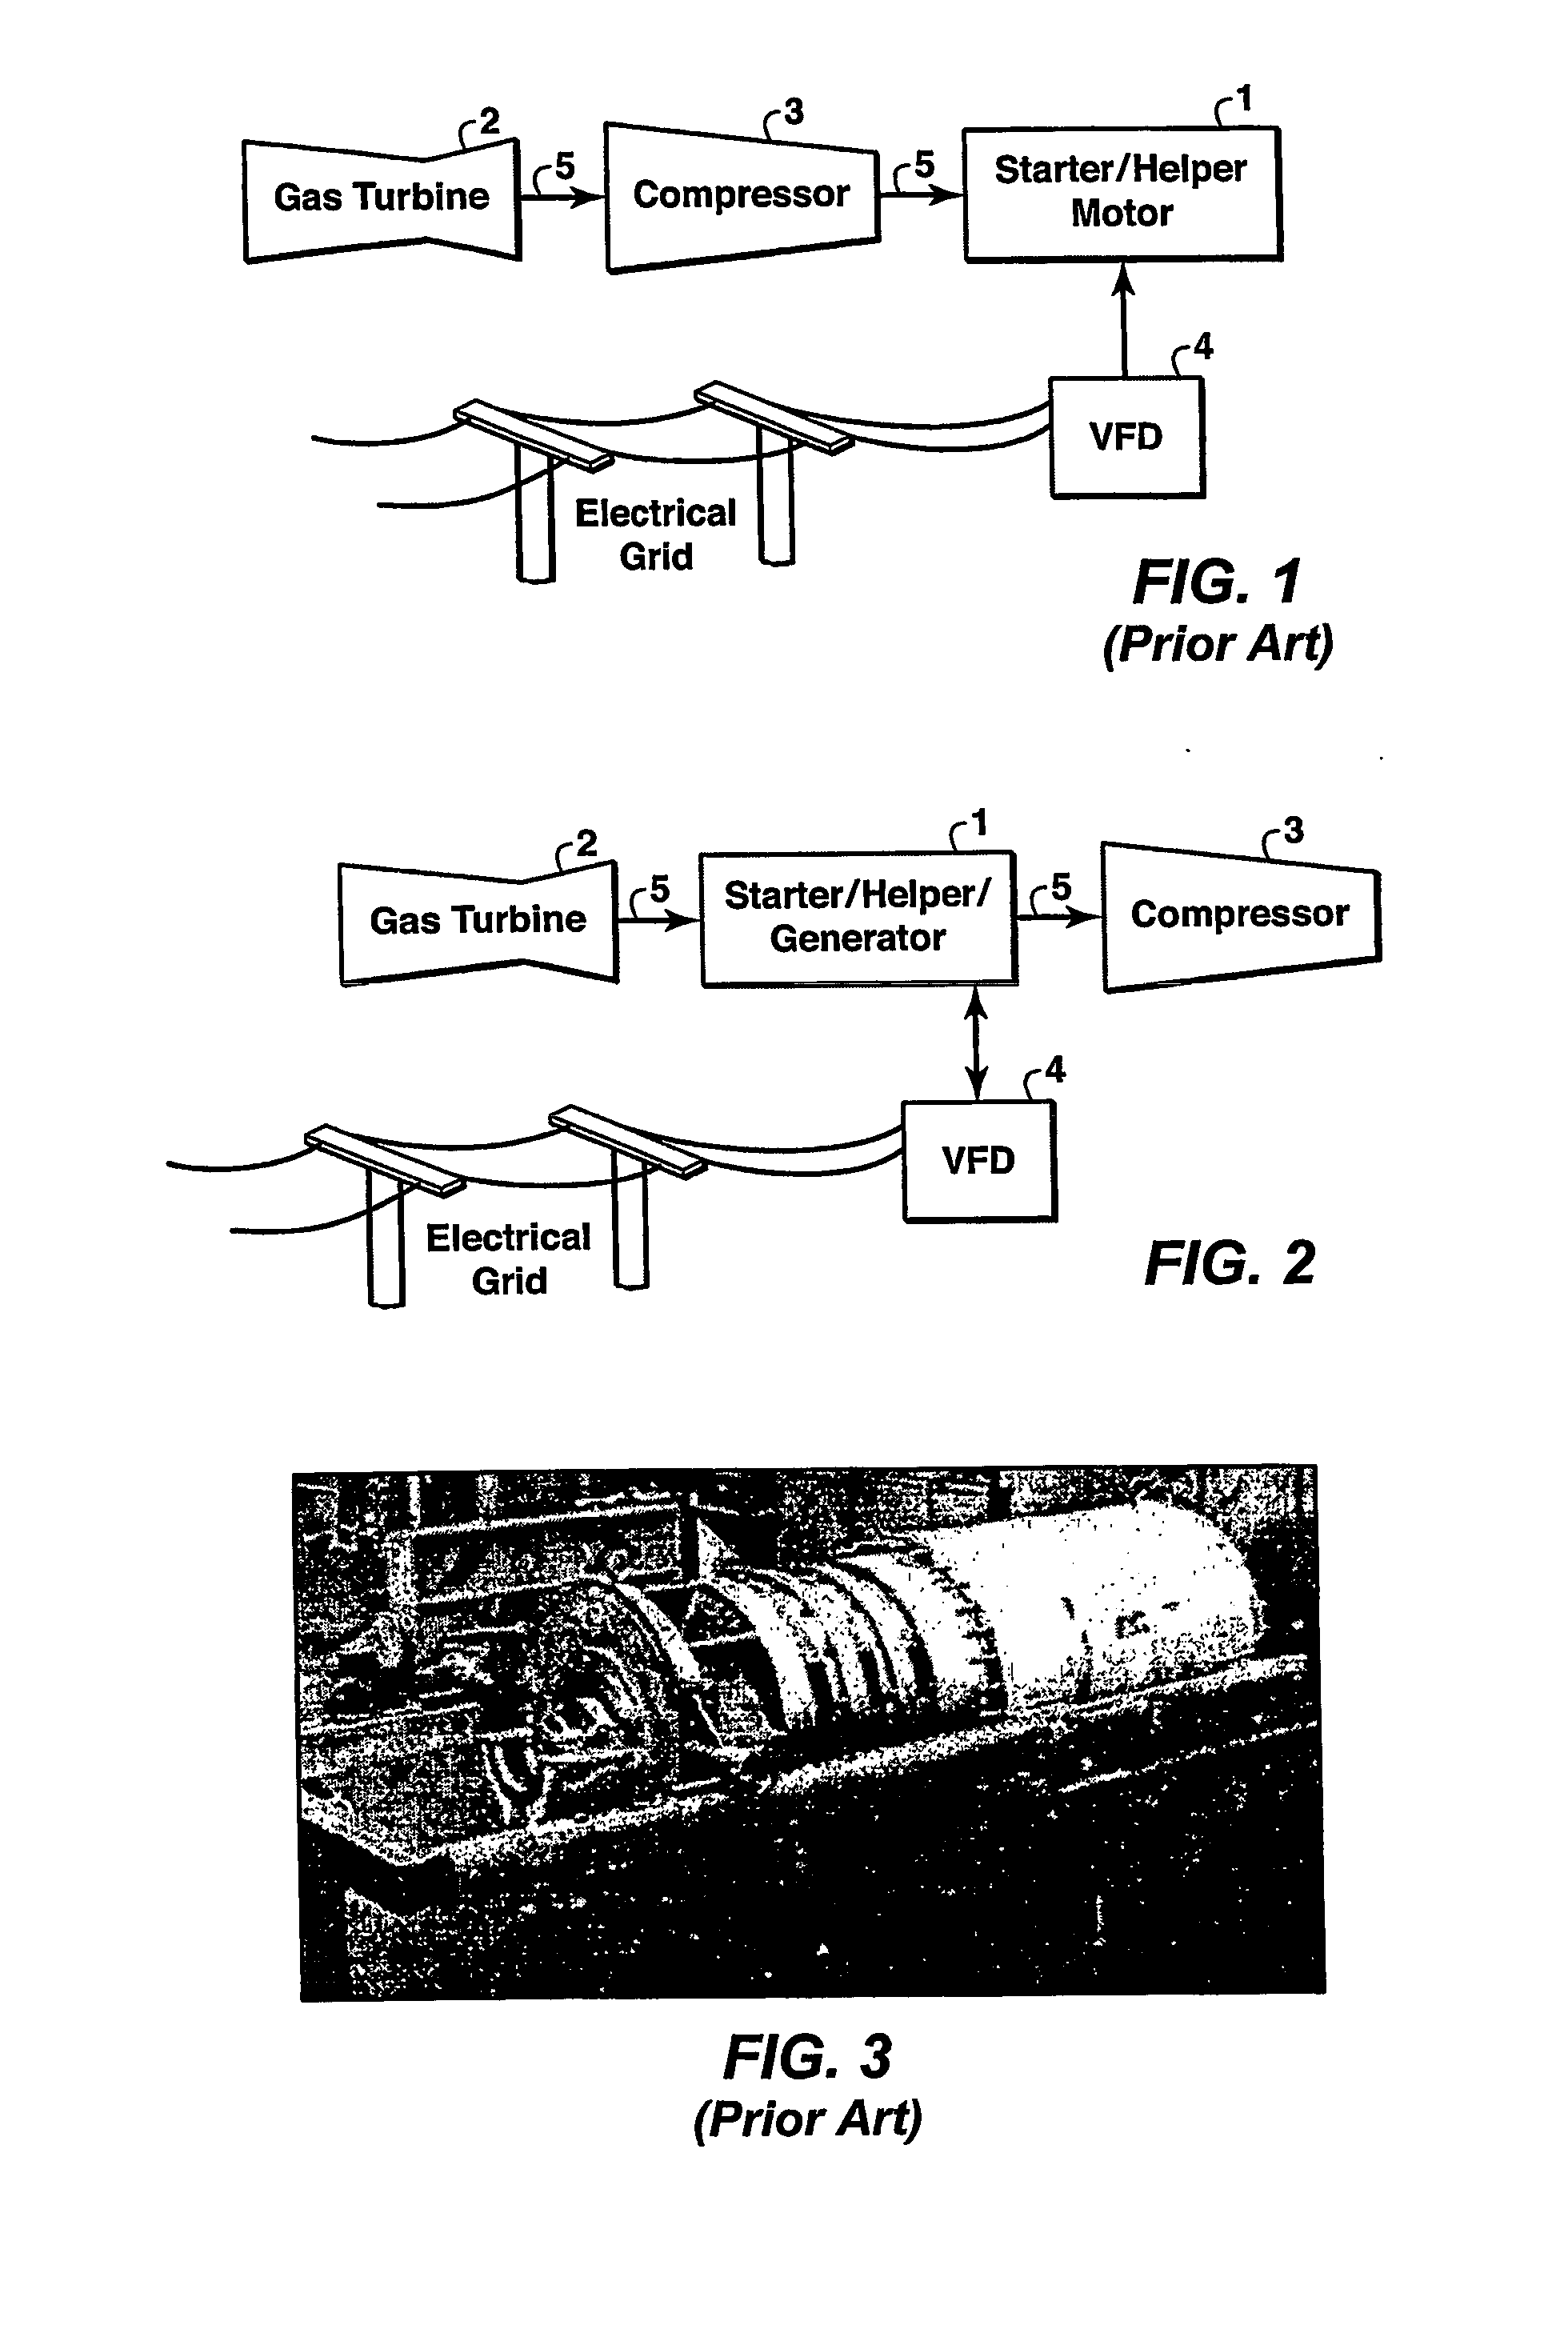 Method for efficient nonsynchronous lng production